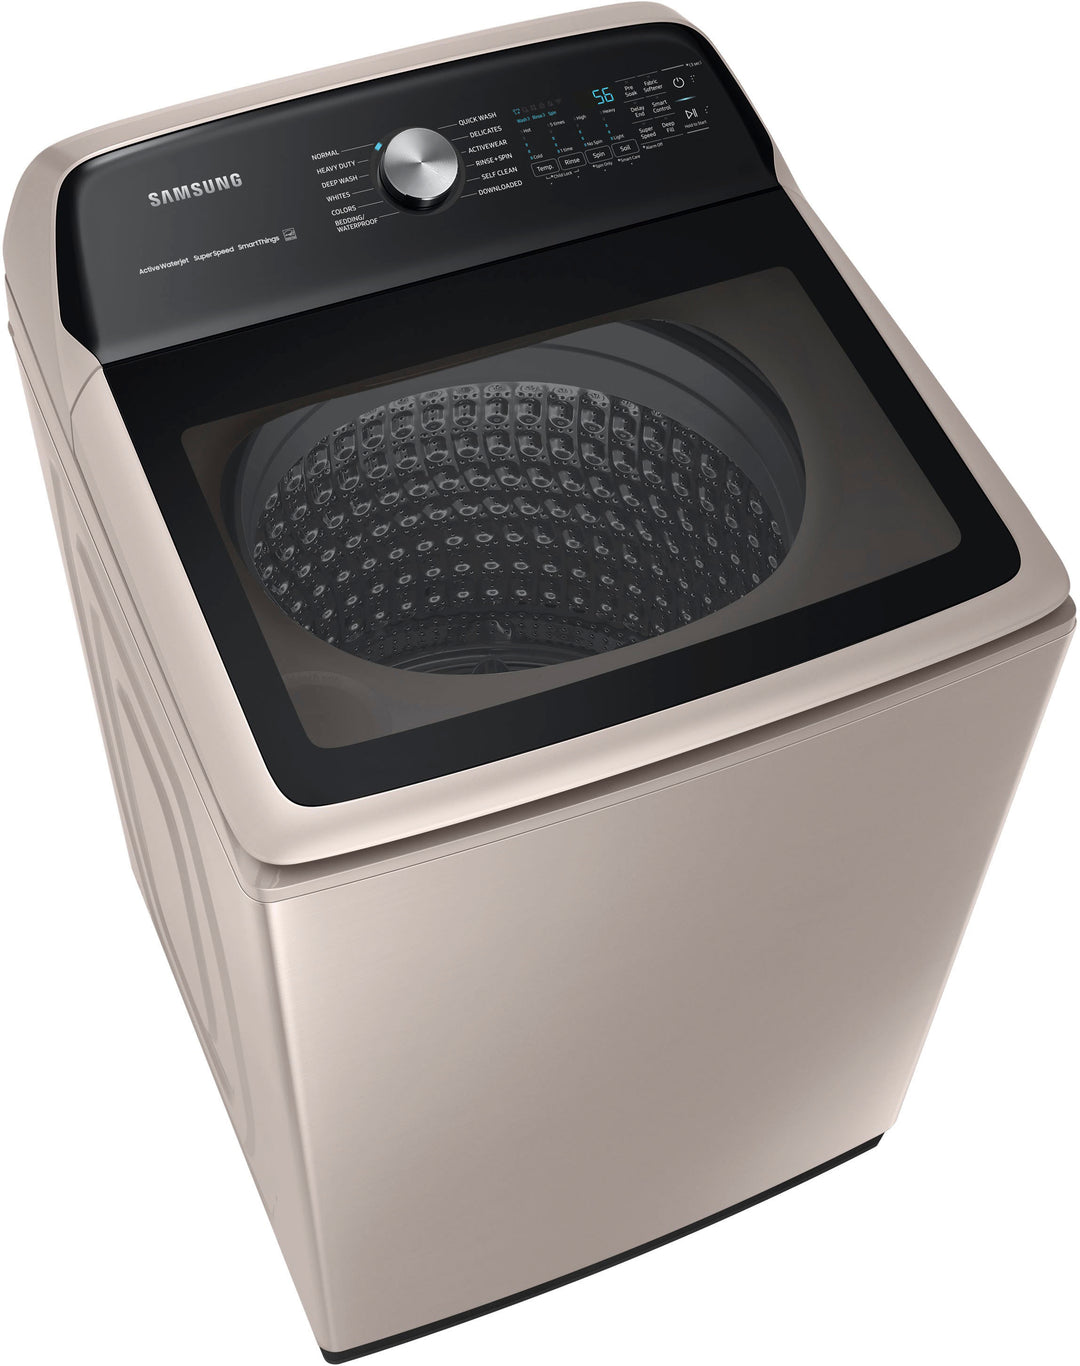 Samsung - 5.2 cu. ft. Large Capacity Smart Top Load Washer with Super Speed Wash - Champagne_5